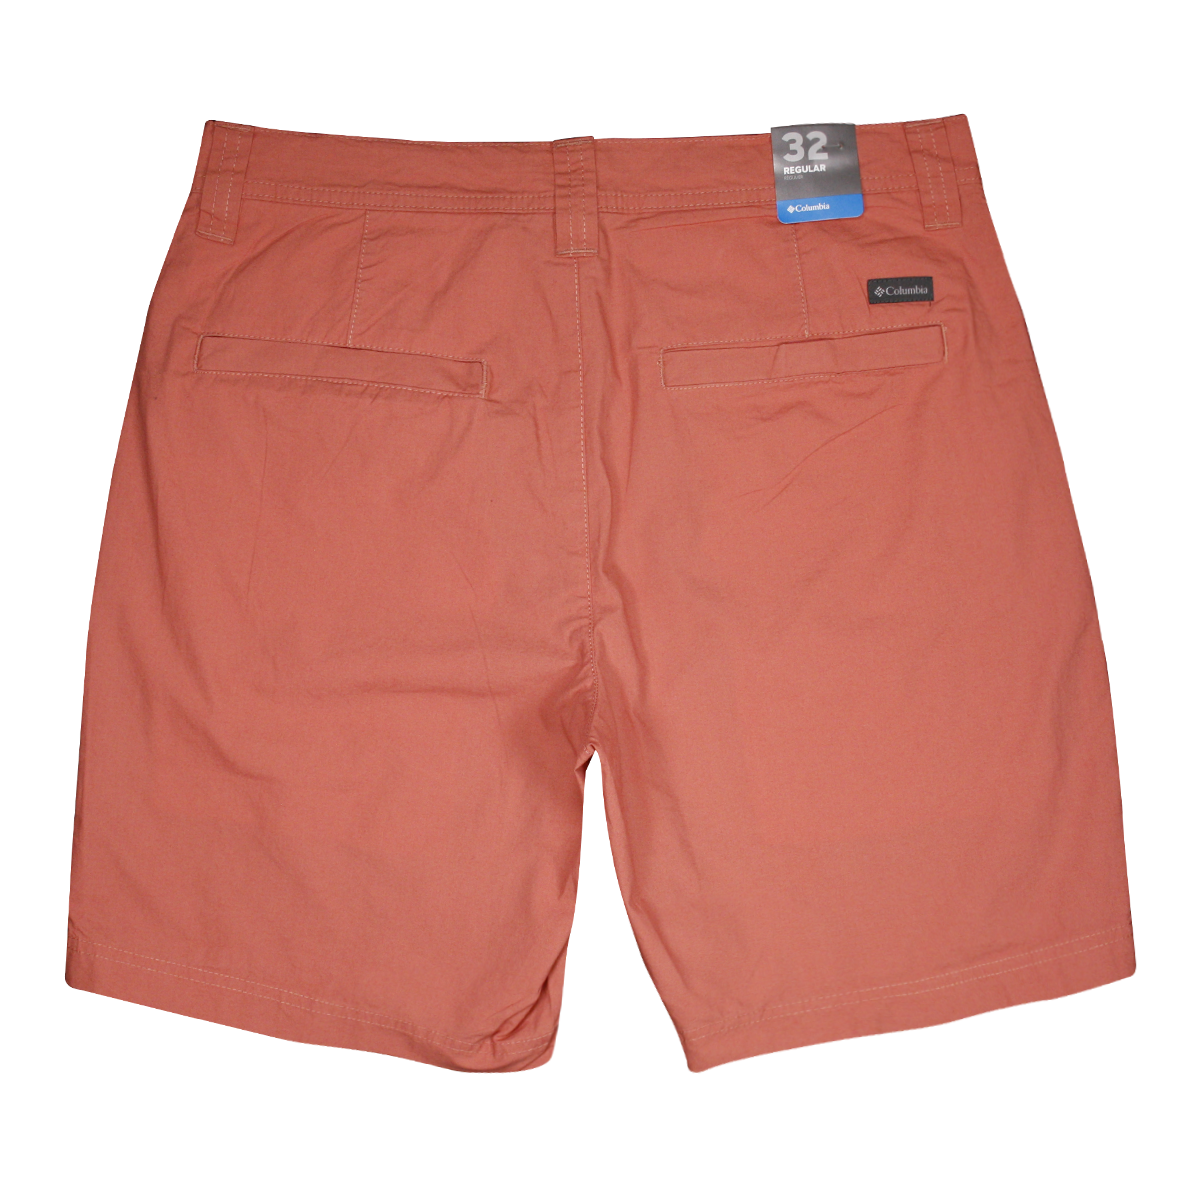 Columbia Men's Classic Washed Out Chino Short